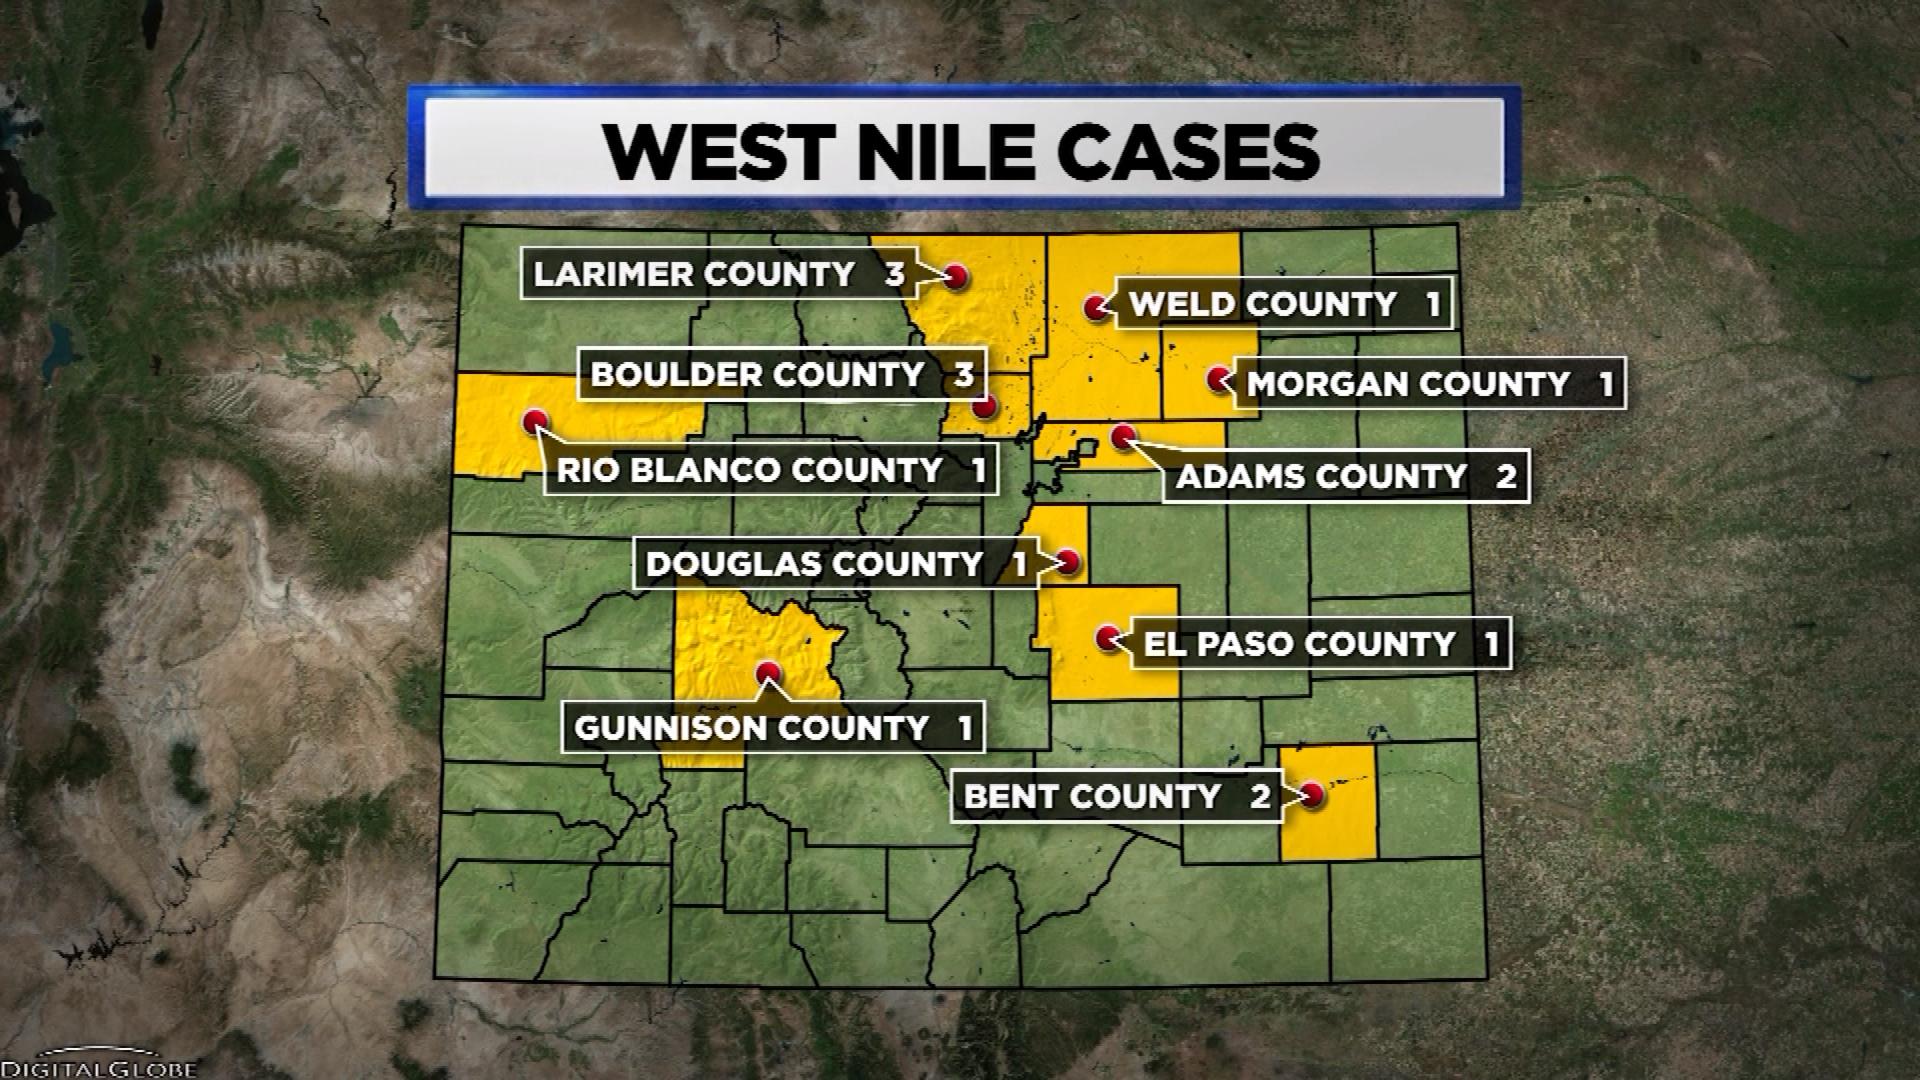 1 Death, 13 Human Cases Of West Nile Virus Reported In Colorado CBS